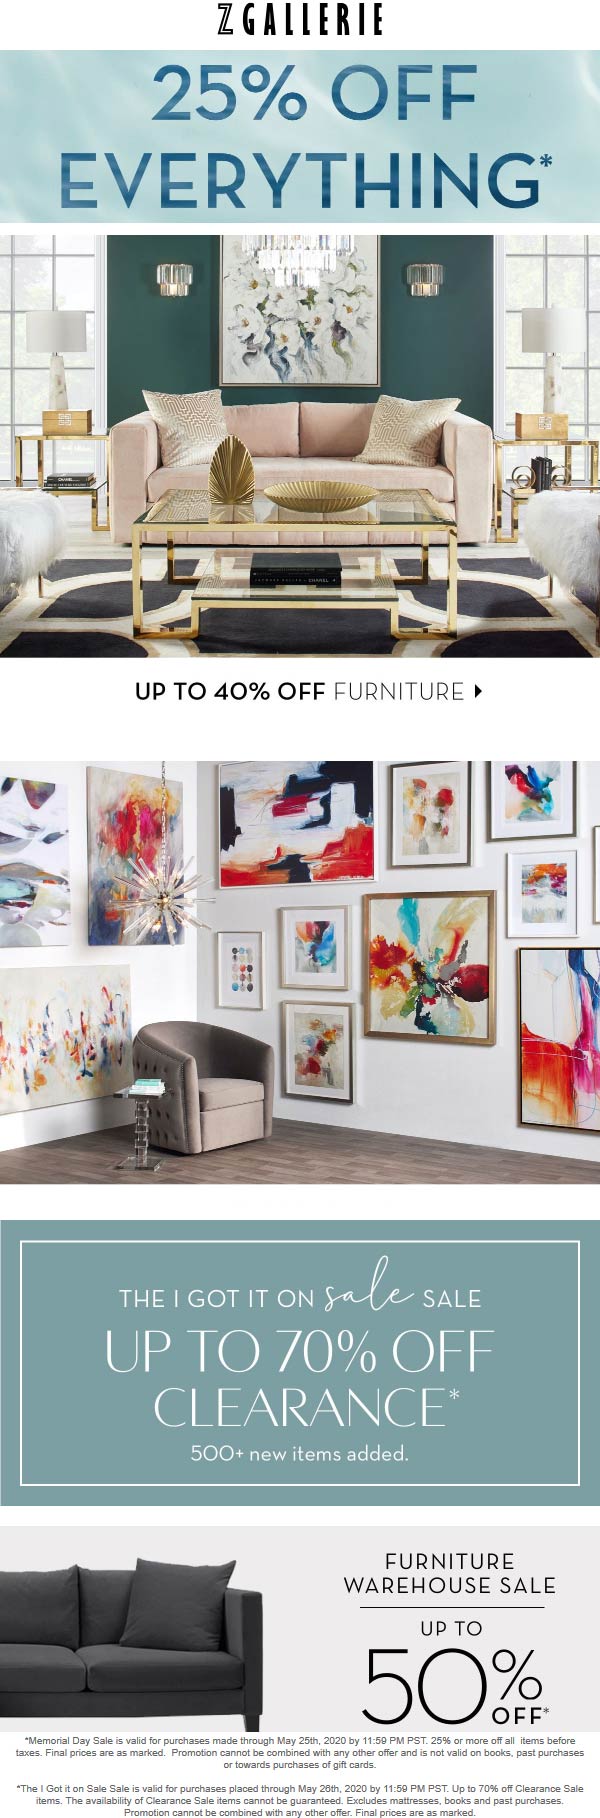 Z Gallerie stores Coupon  25-50% off everything at Z Gallerie furniture #zgallerie